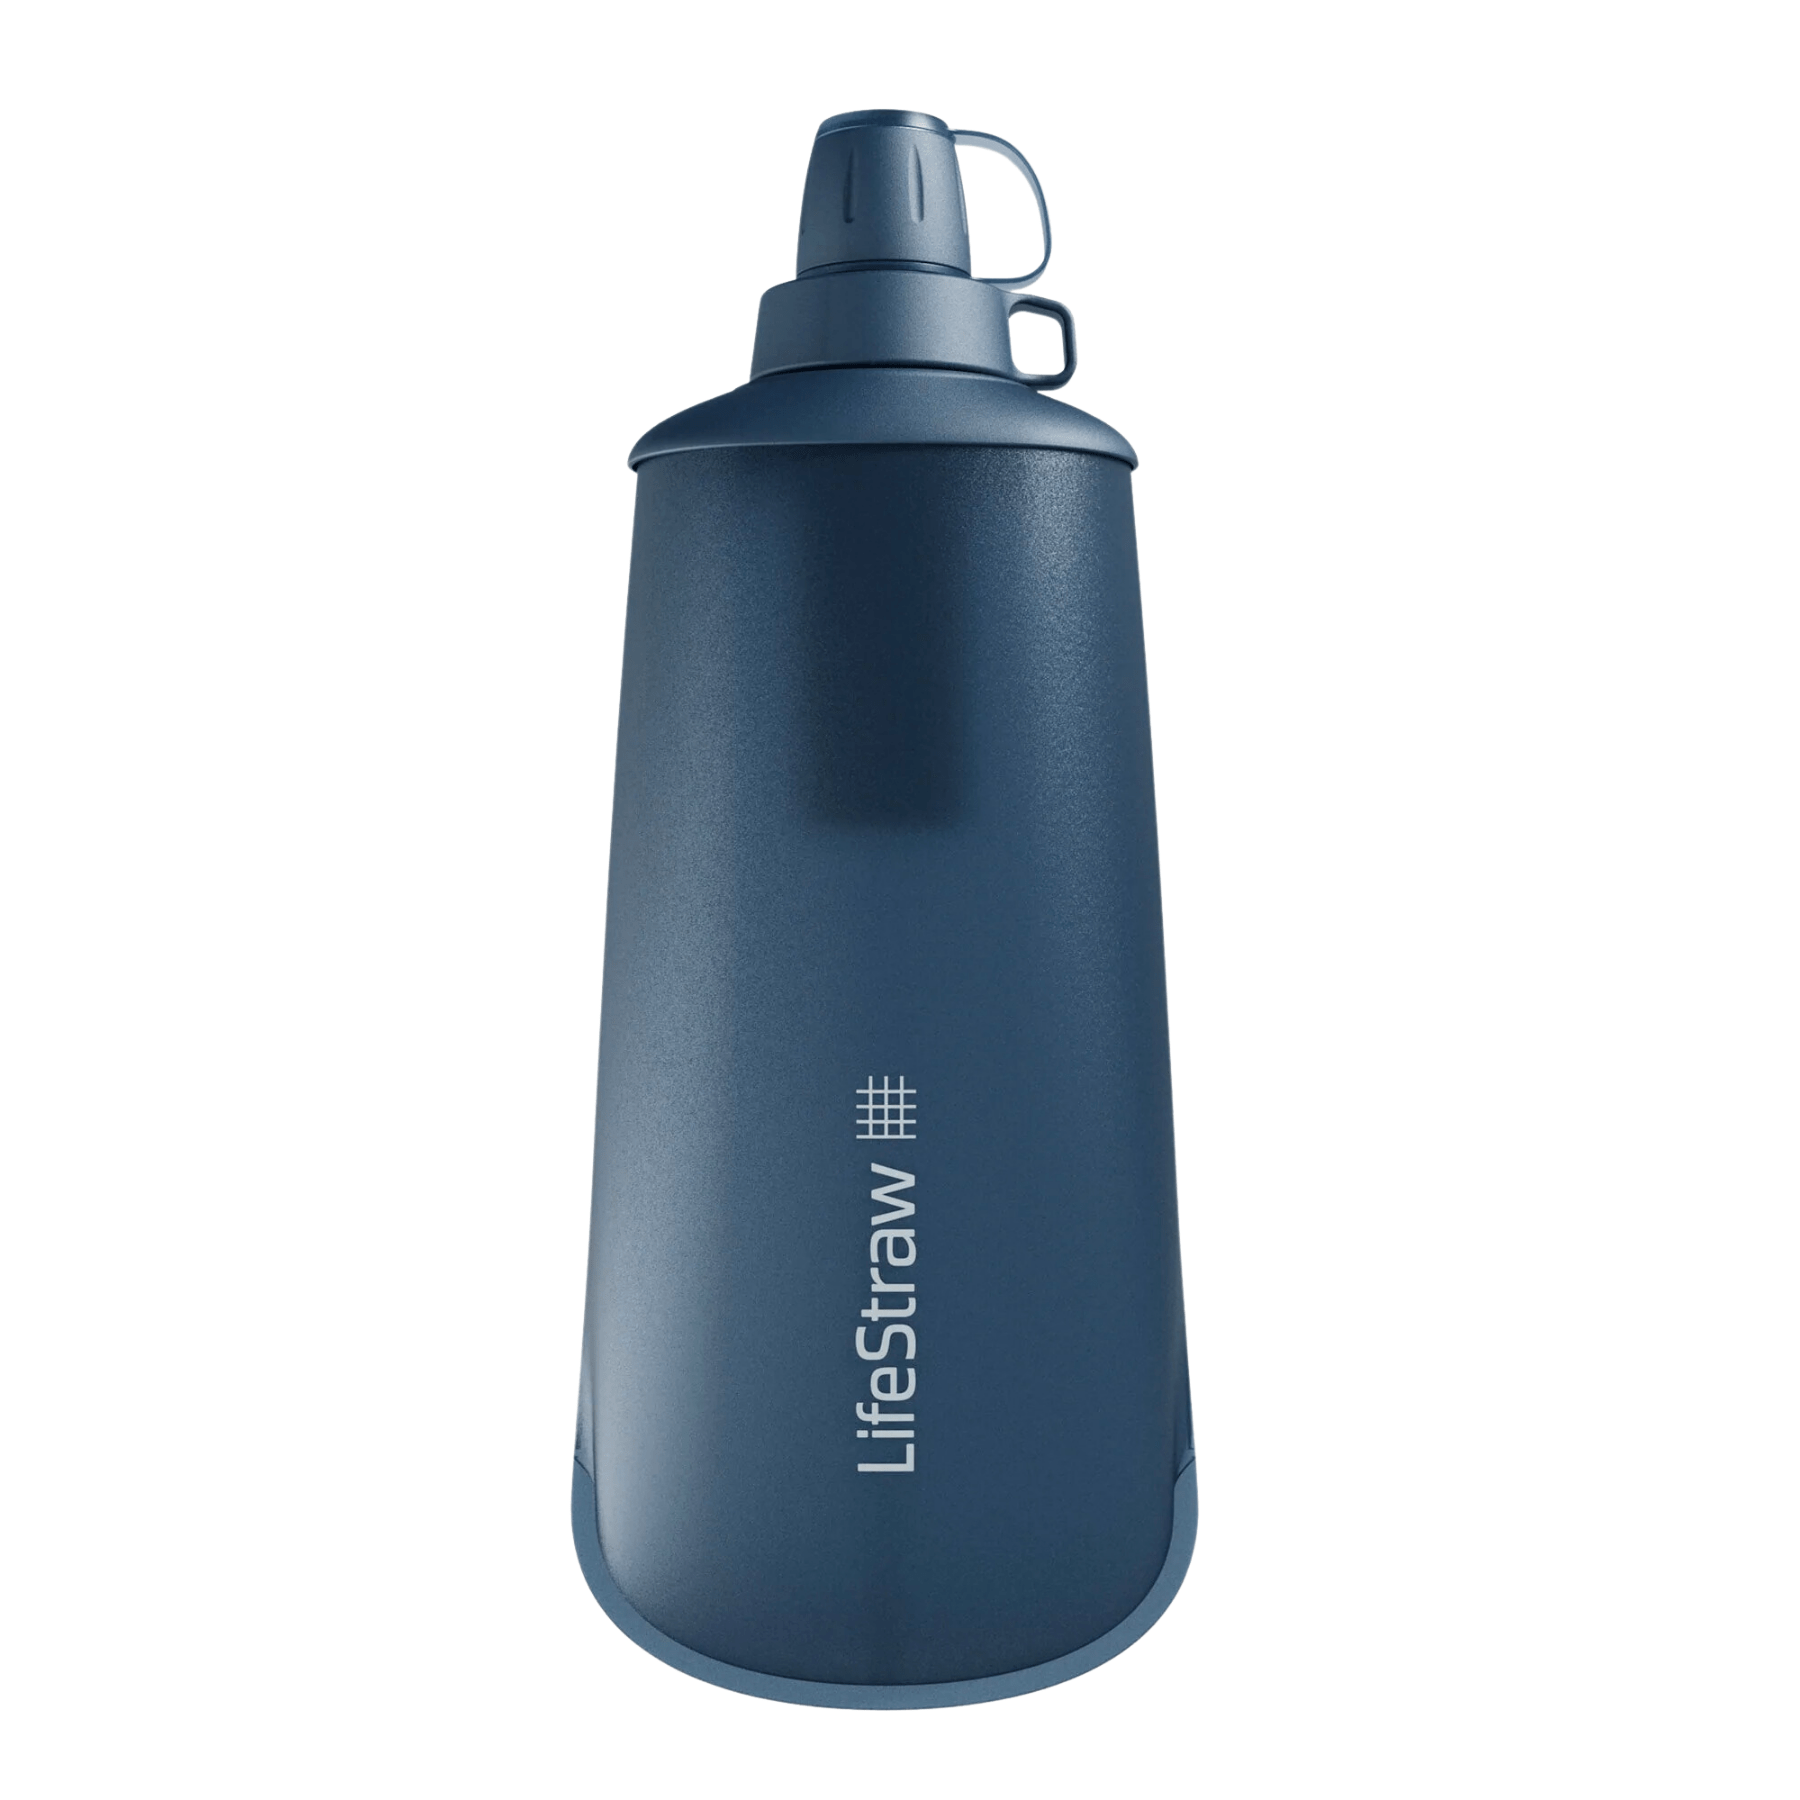 Lifestraw Water Treatment 1 L / Mountain Blue Collapsible Squeeze Bottle With Filter Peak Series